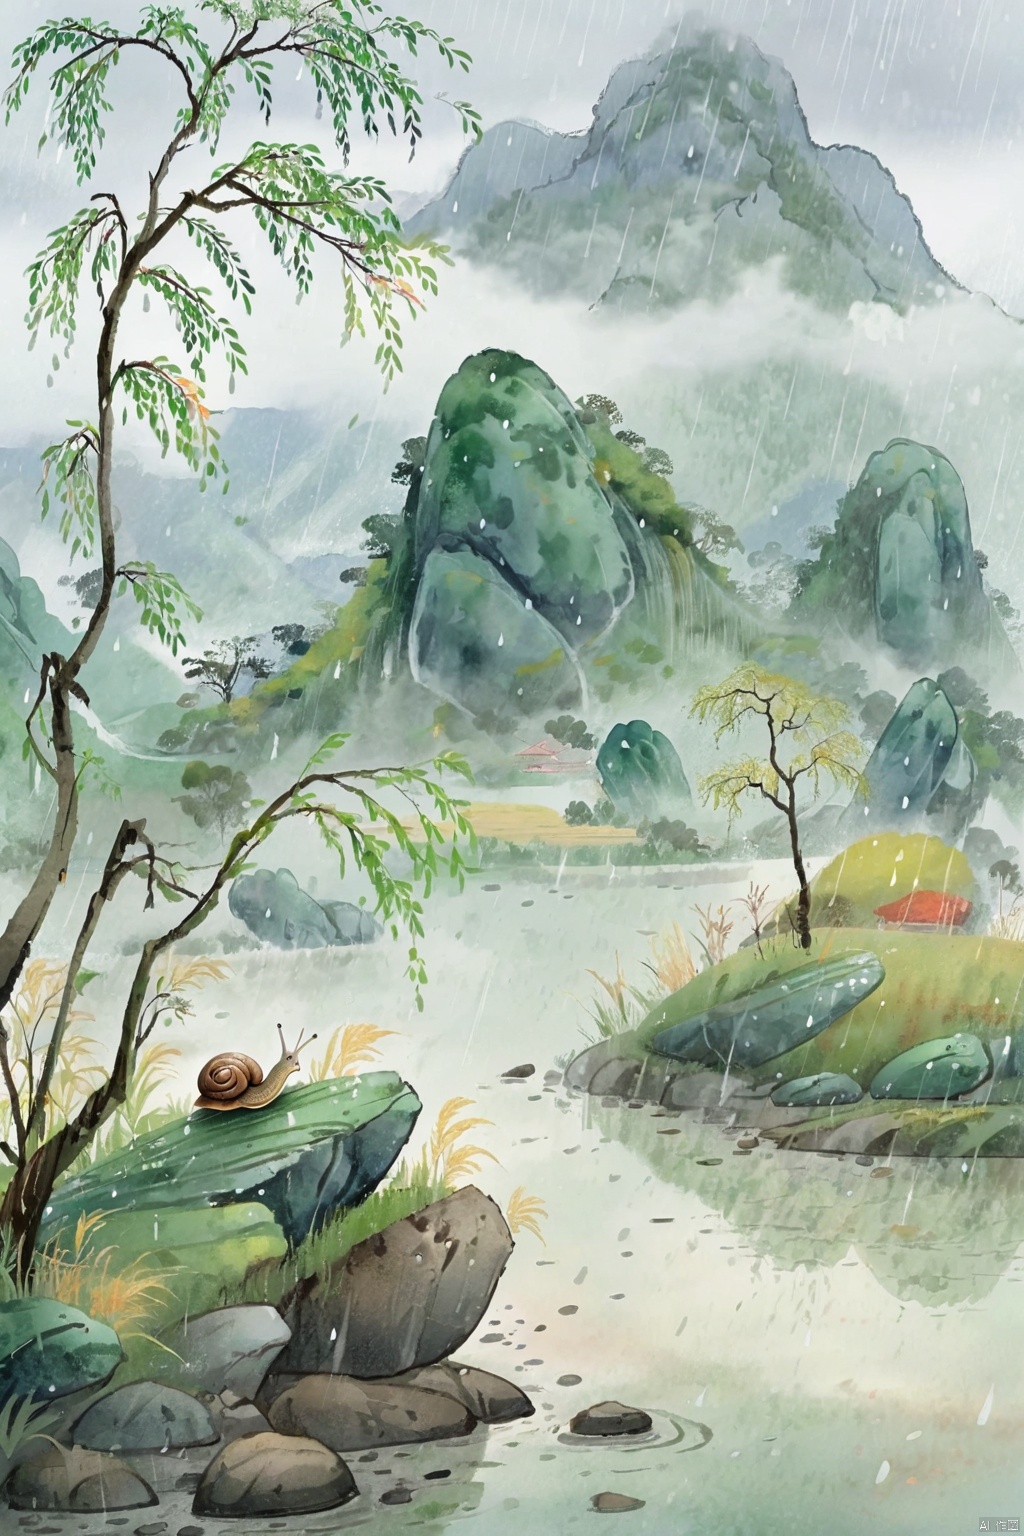  ((masterpiece)), ((best quality)),raining, Fields, side paths, Willow trees, branches, grass, mountains,mist,1 little snail sitting on the rock,looking at the fields,rainforrest raining
, guofeng